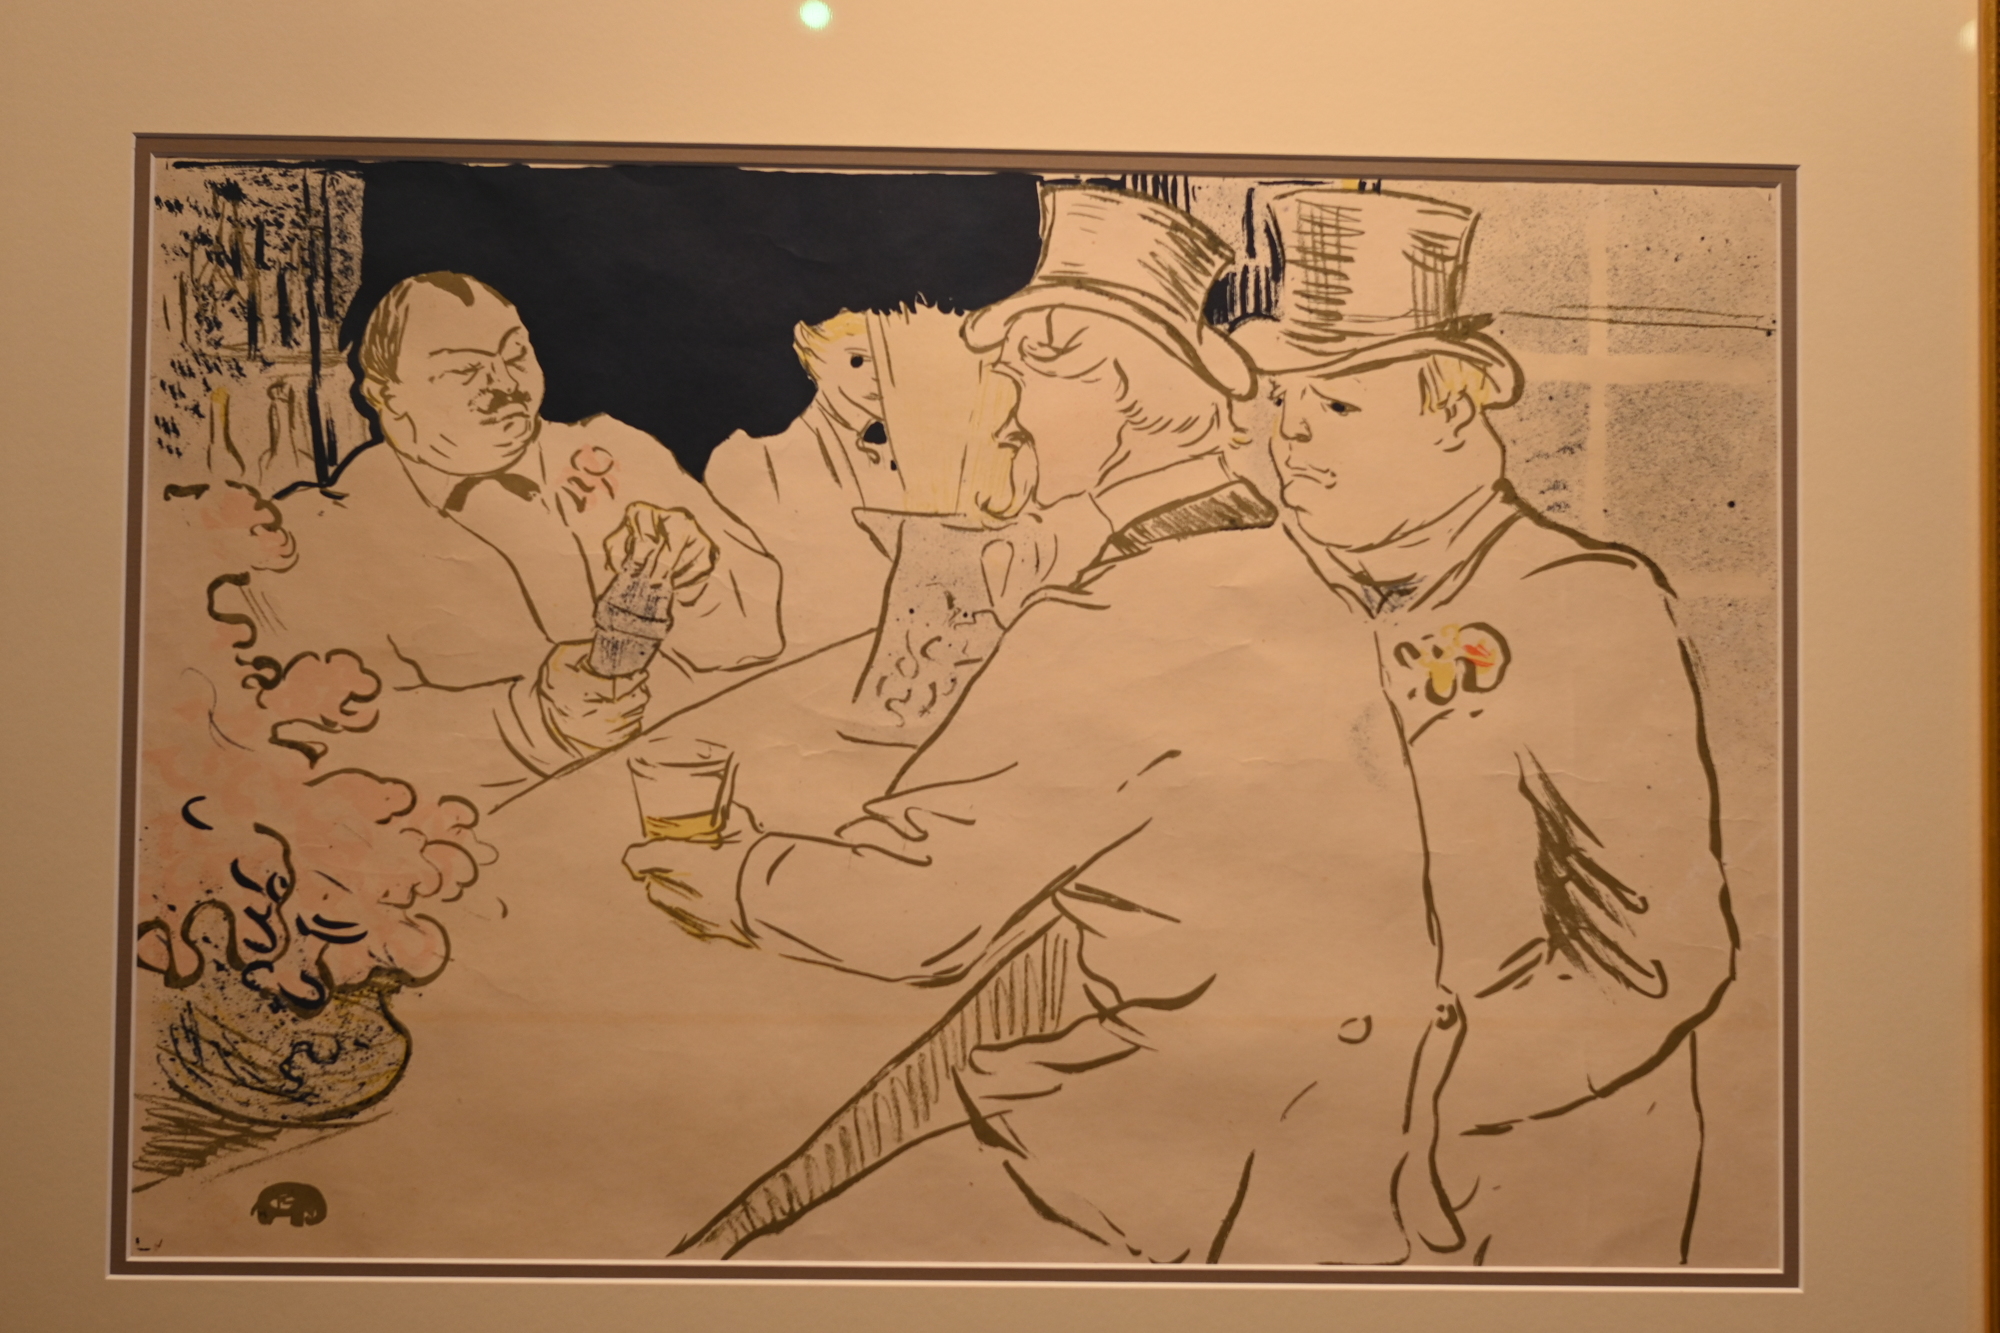 A work by Henri de Toulouse-Lautrec in the Stakenborg Greenberg gallery. (Photo by Spencer Fordin)